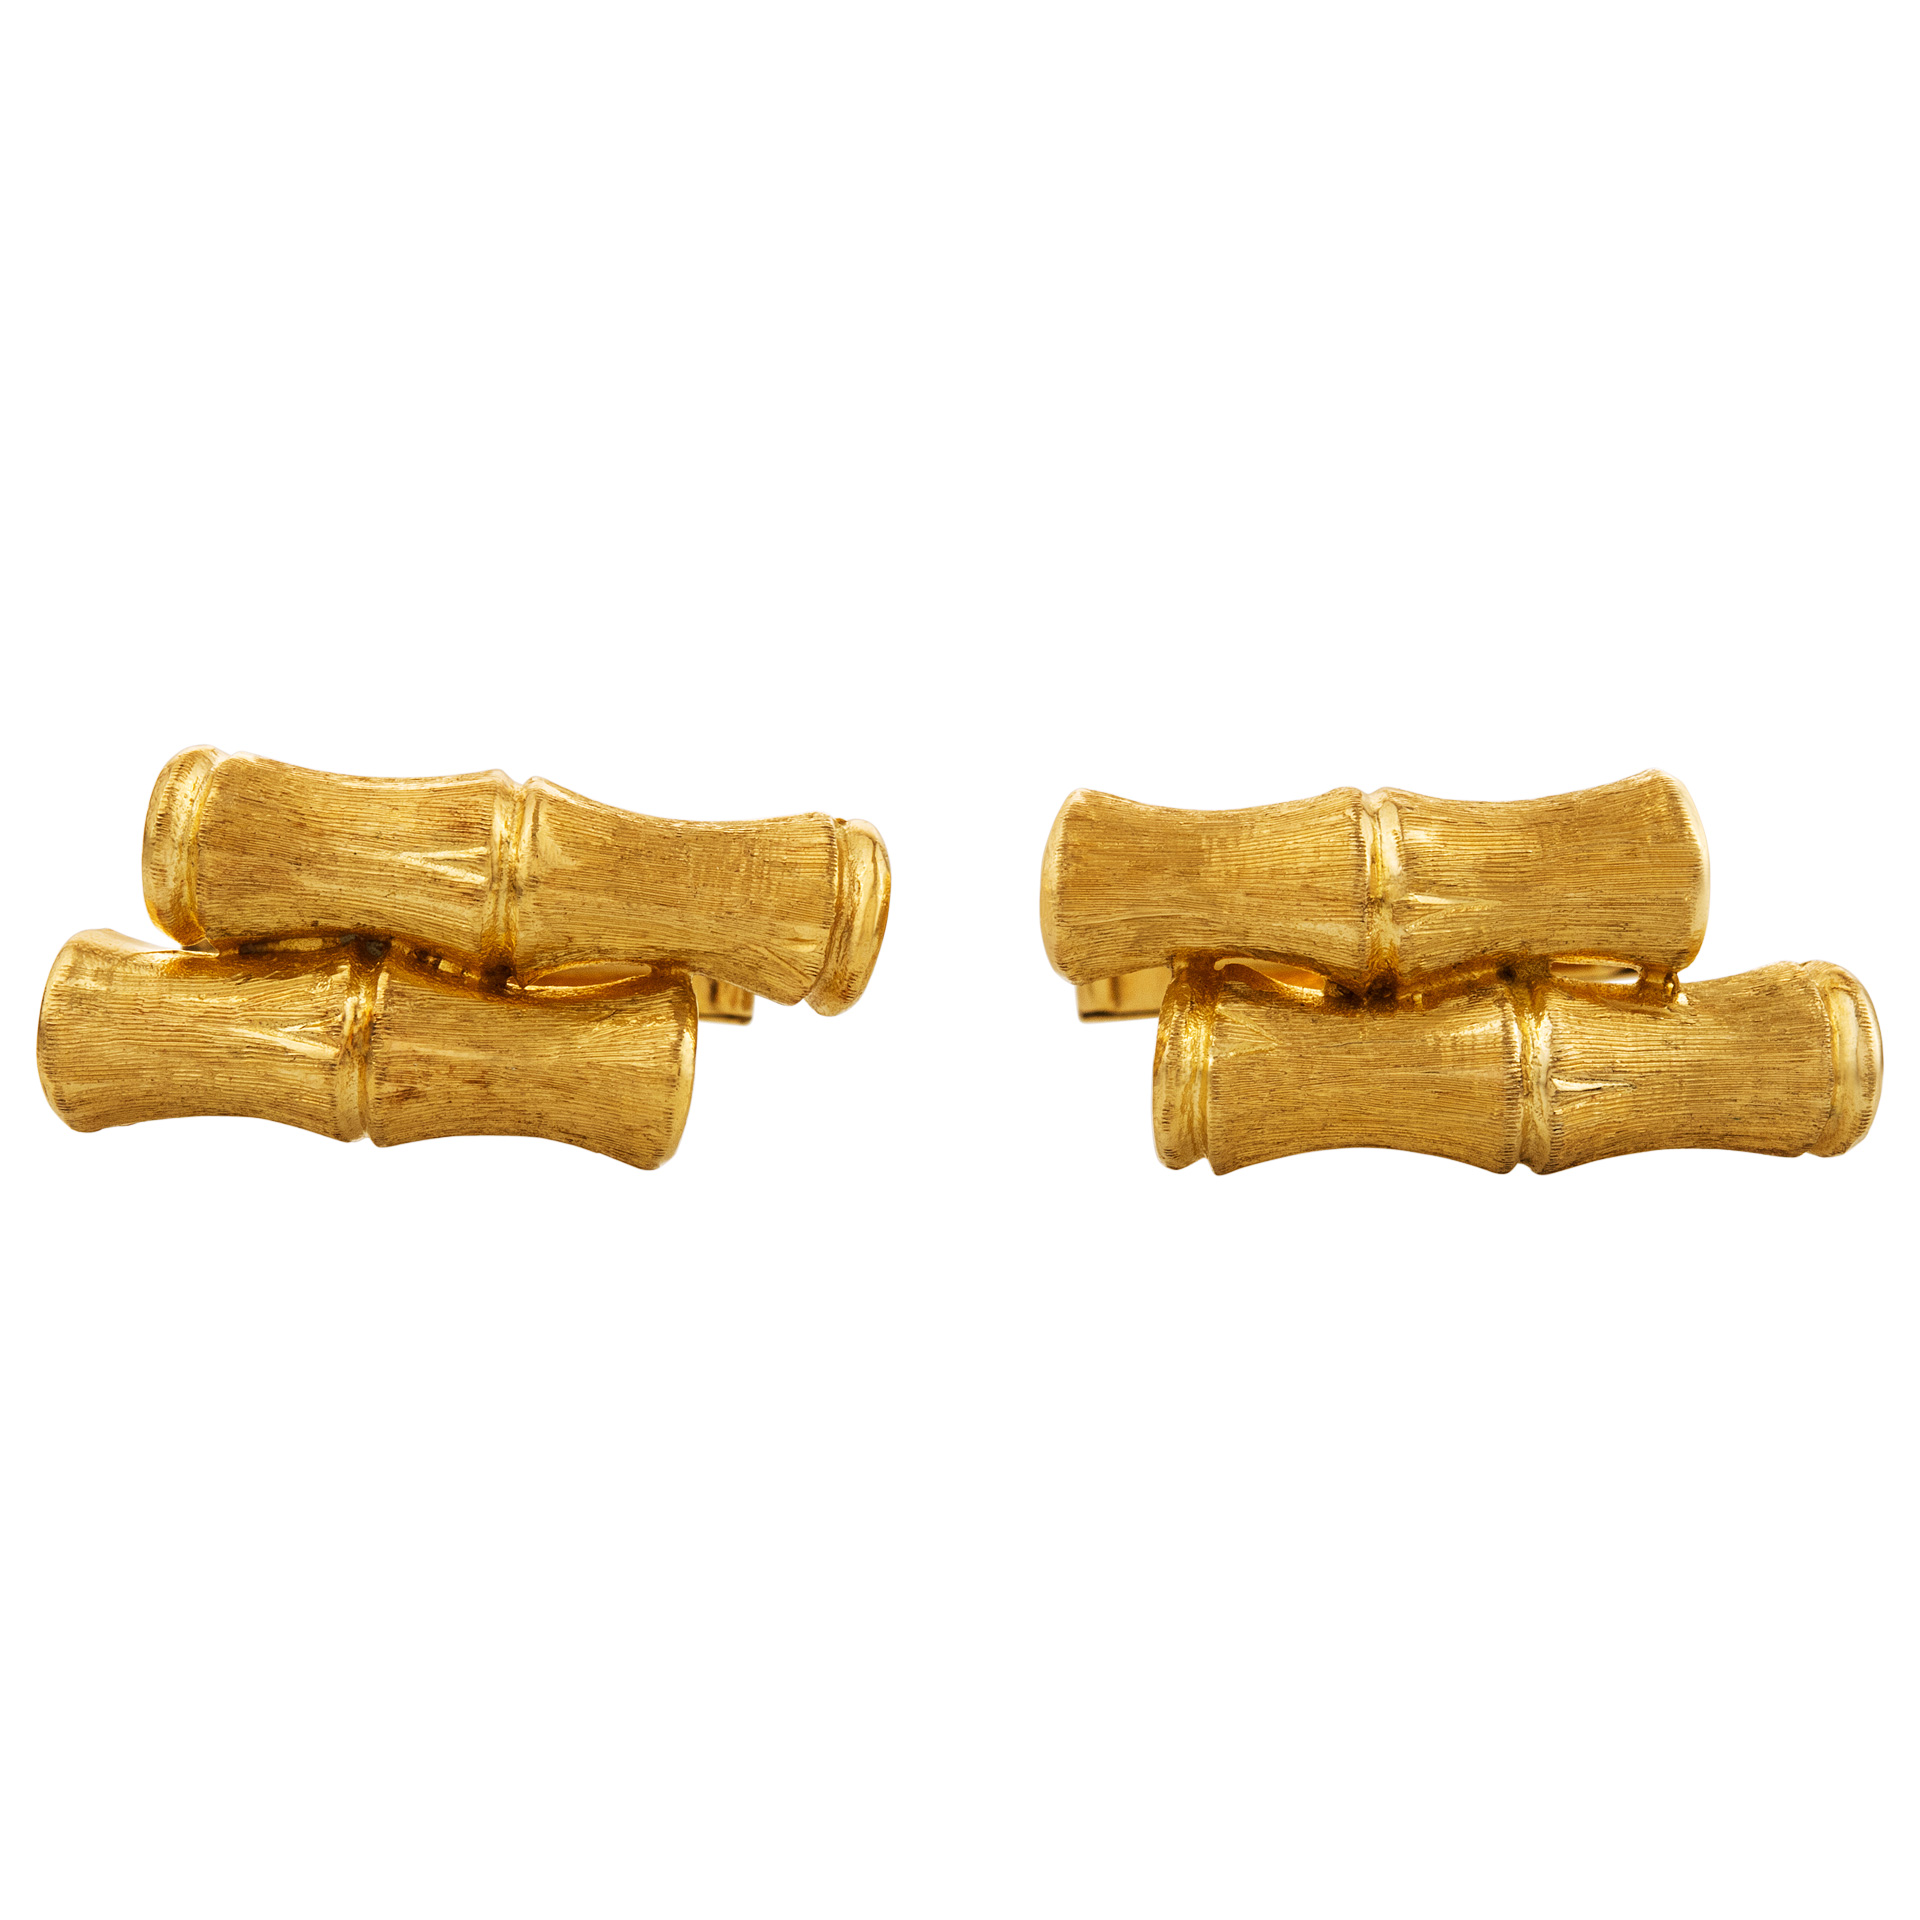 Bamboo form cufflinks In 14k yellow gold